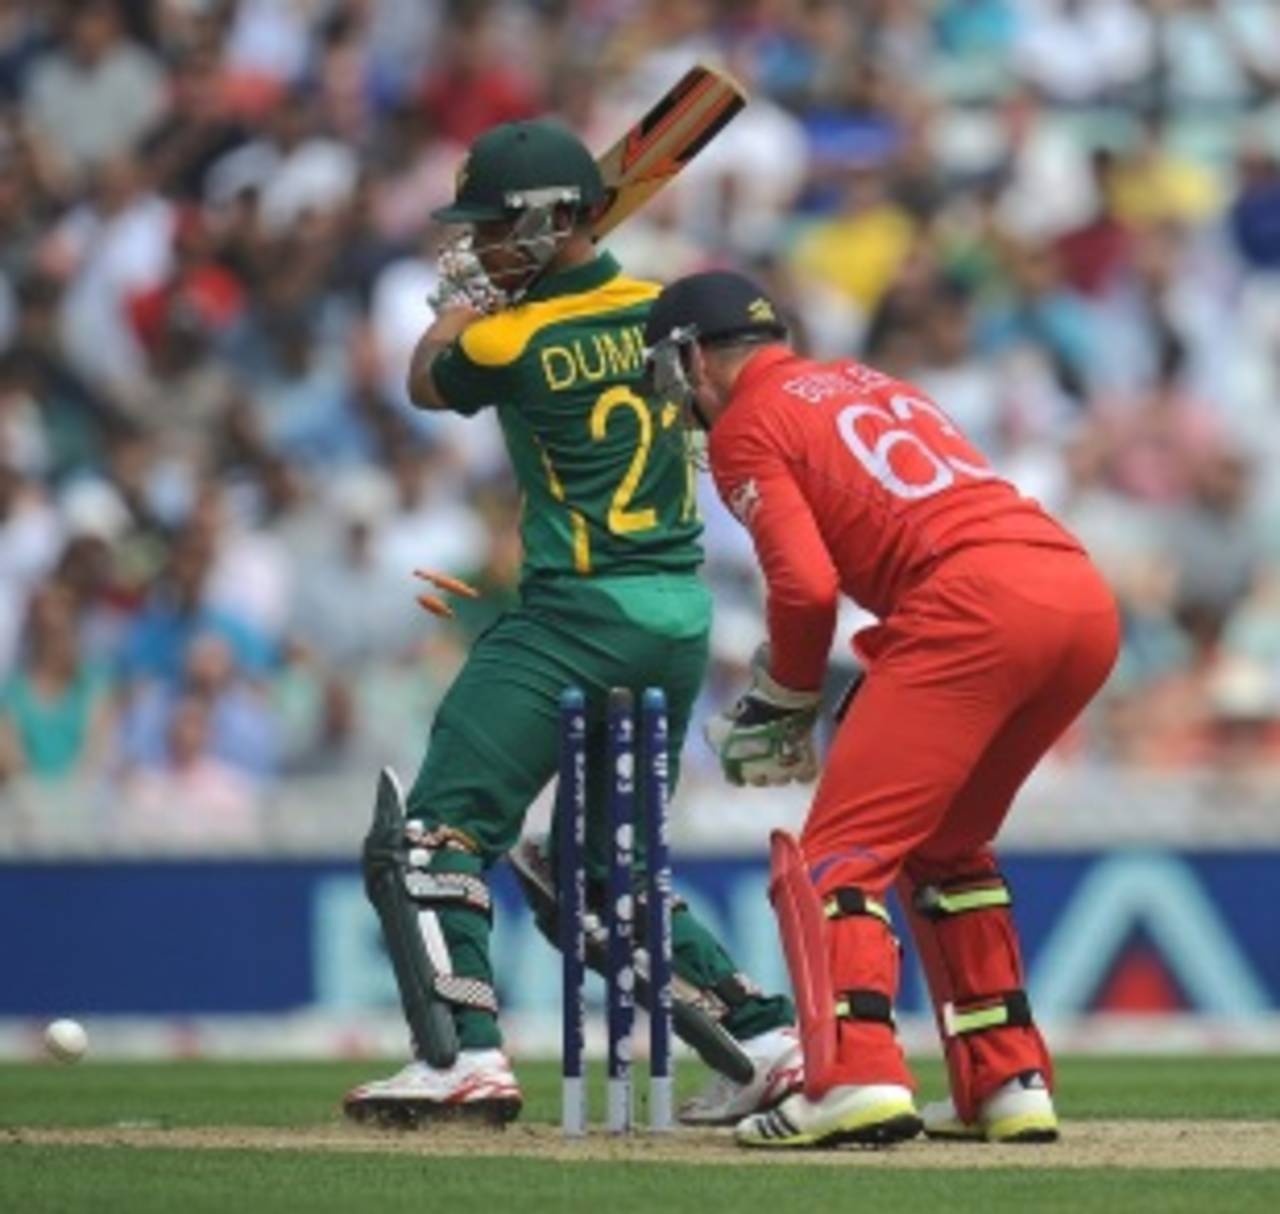 JP Duminy was bowled by James Tredwell, England v South Africa, 1st semi-final, Champions Trophy, The Oval, June 19, 2013